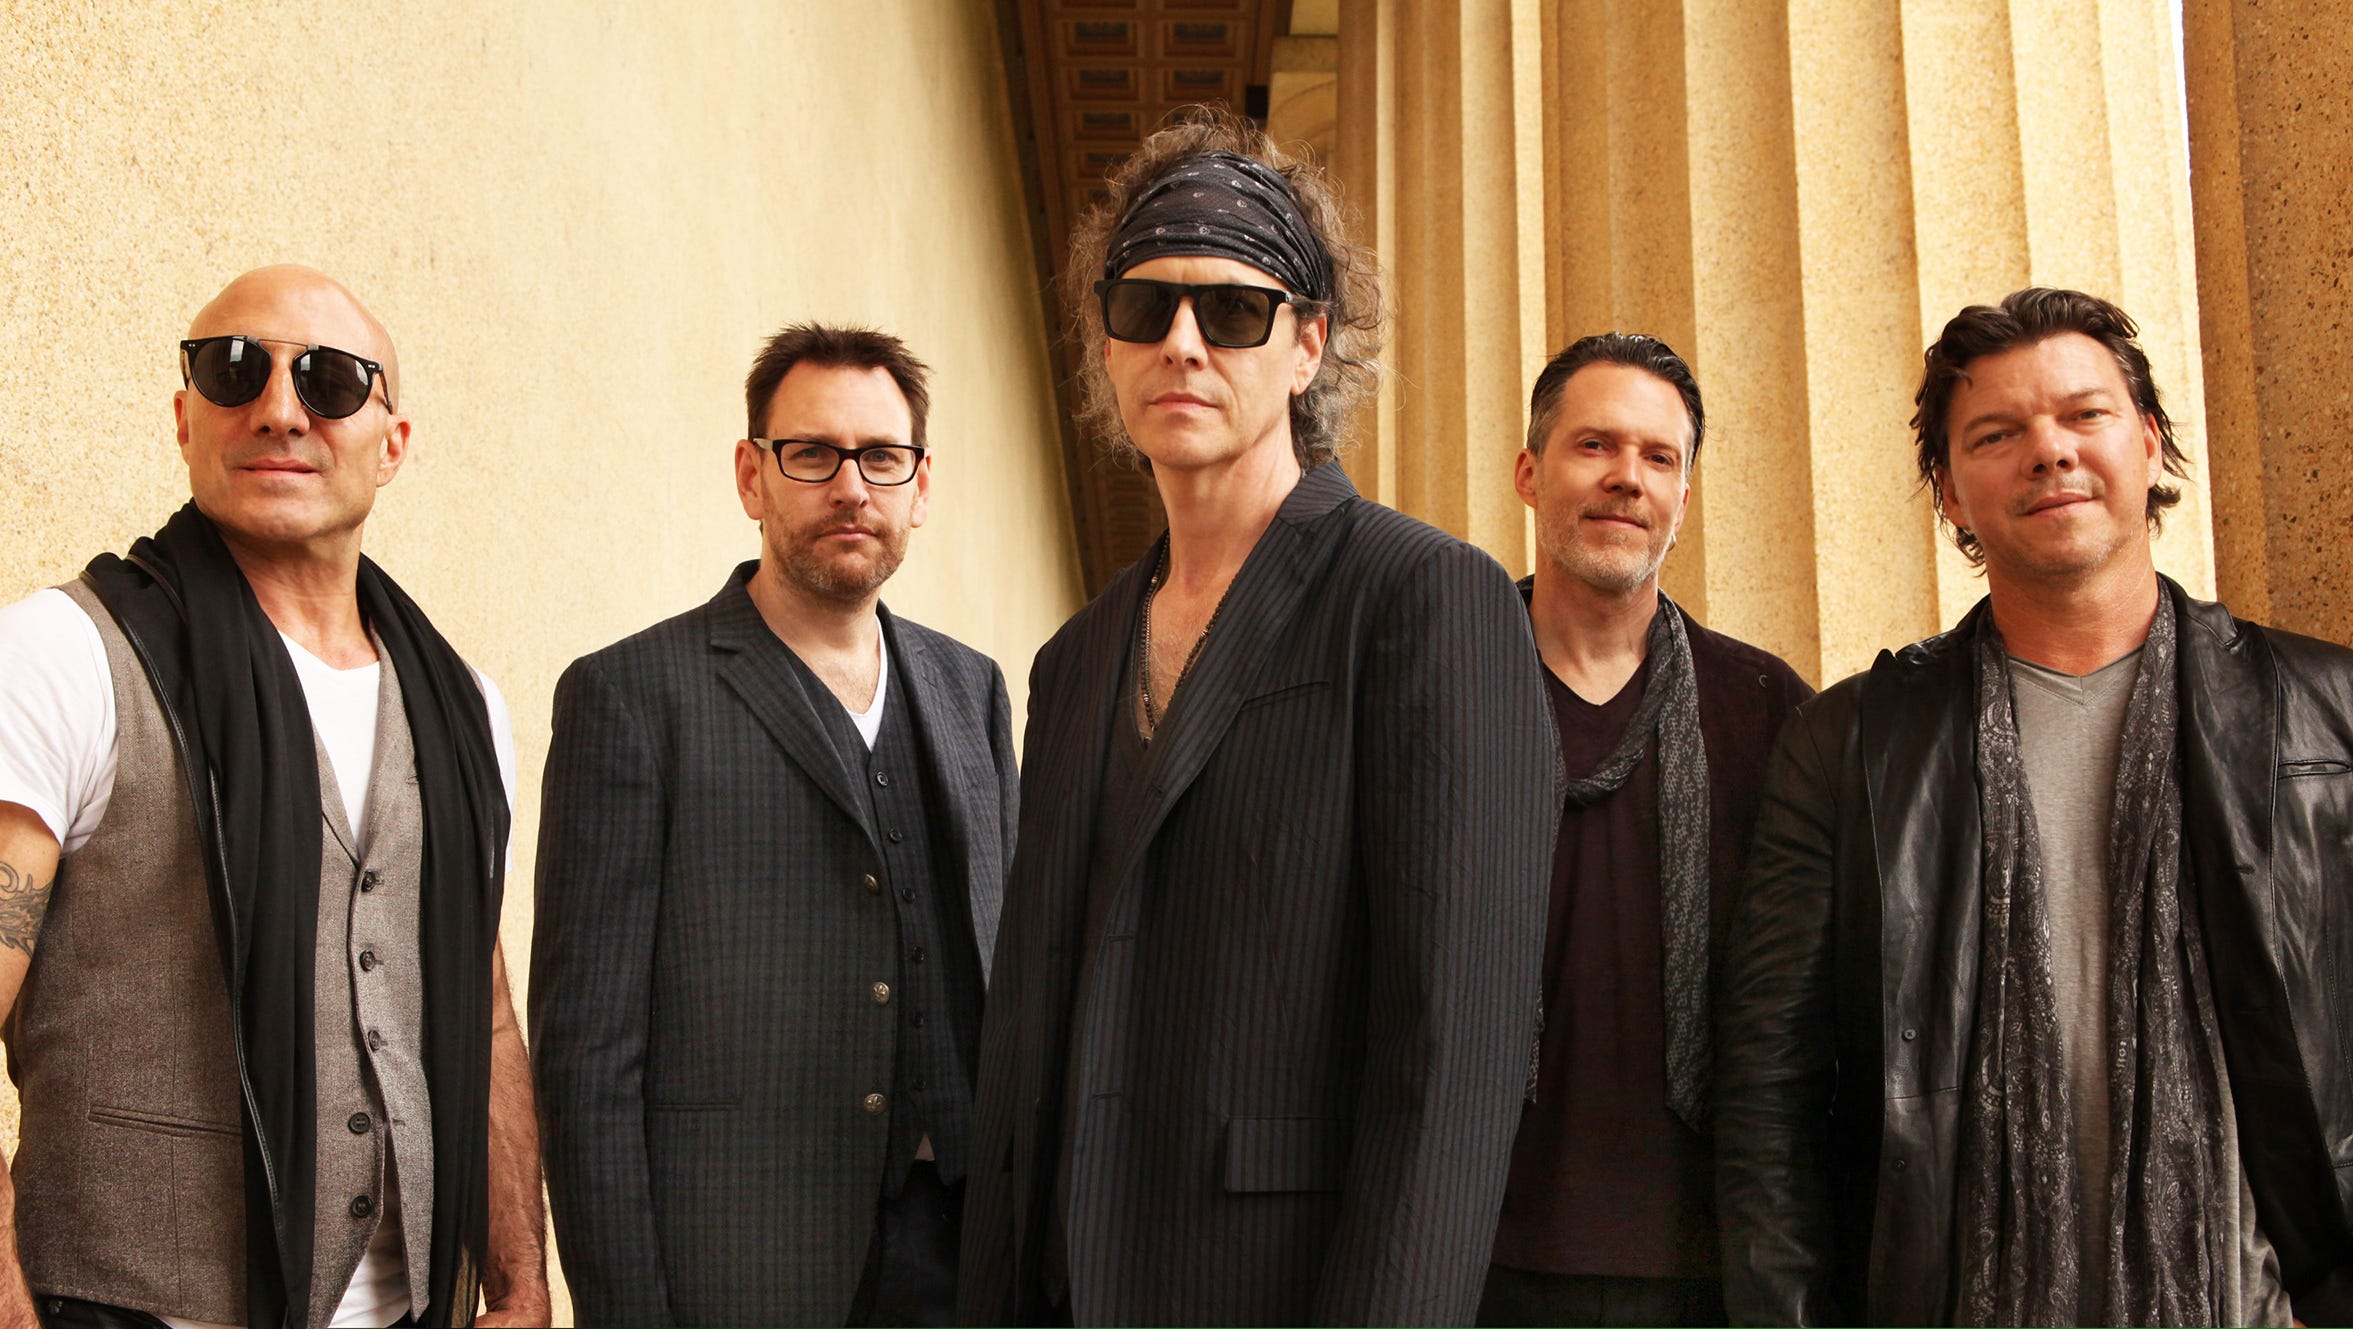 BoDeans to play Oshkosh Waterfest on Thursday at Leach Amphitheater